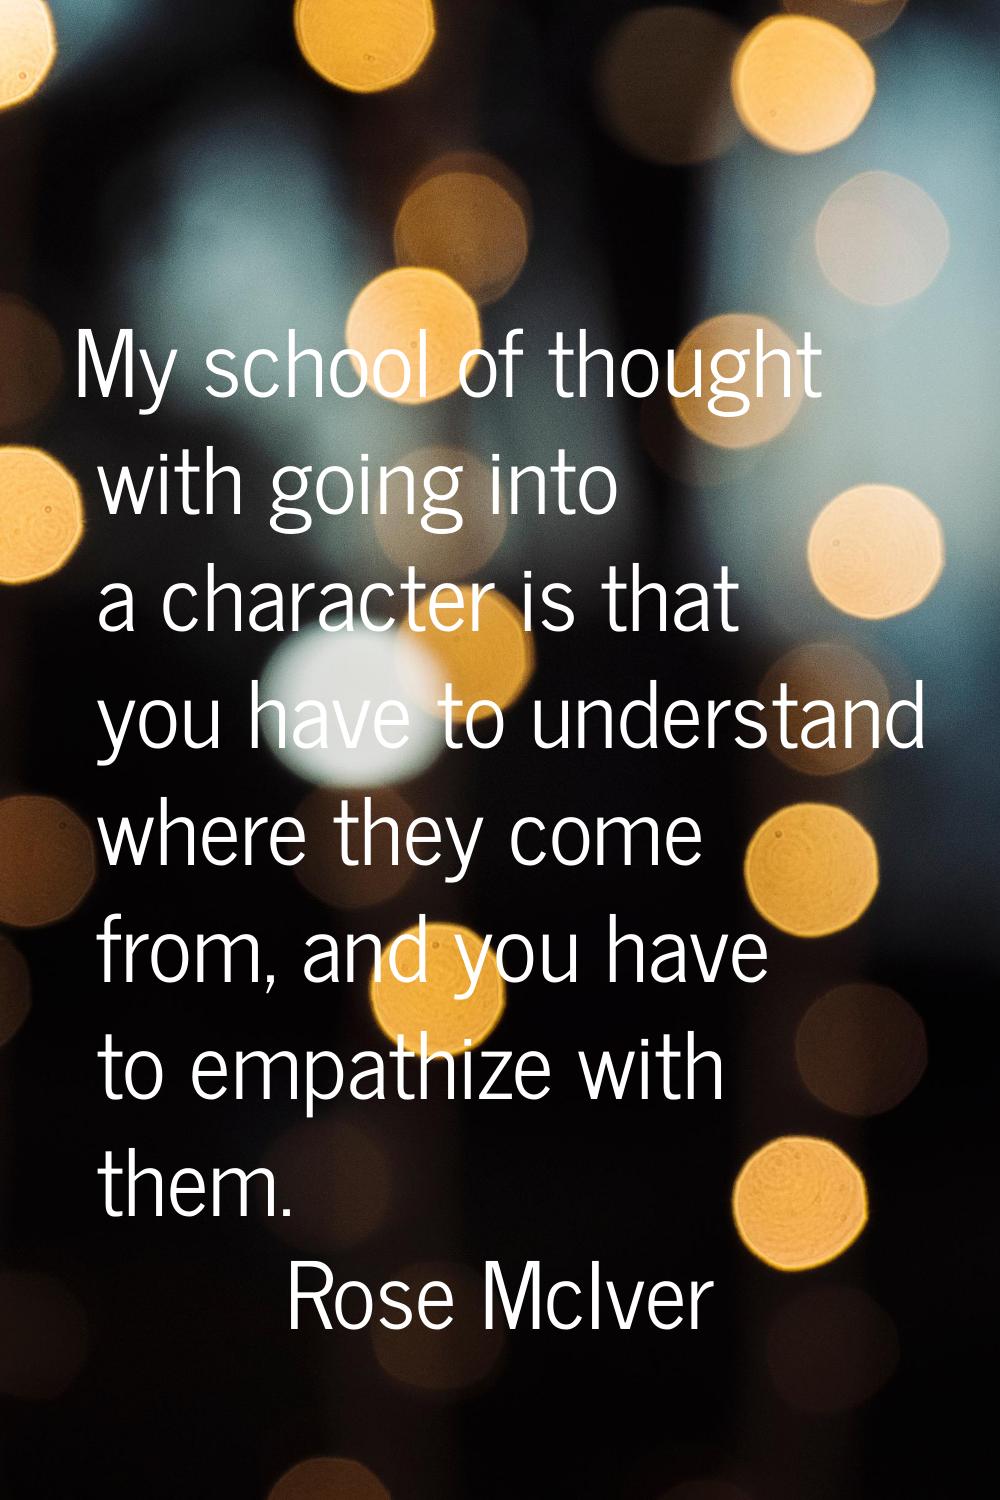 My school of thought with going into a character is that you have to understand where they come fro